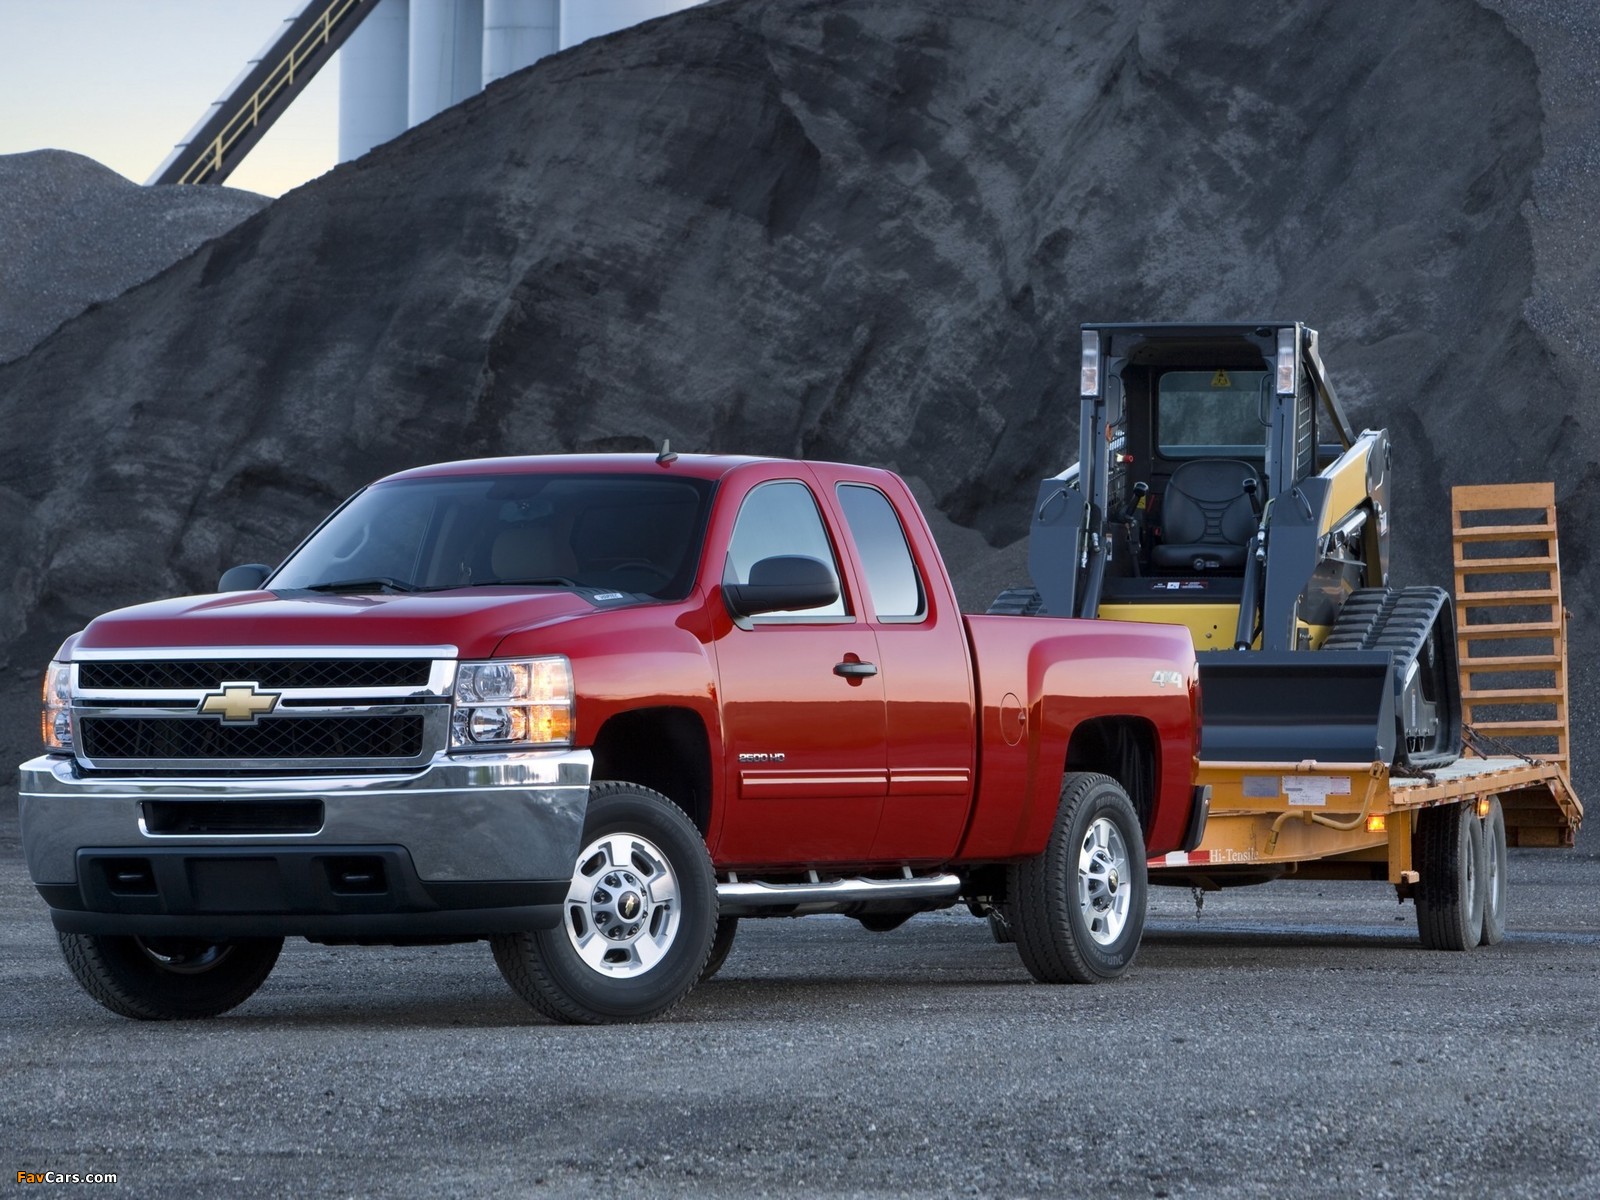 Chevrolet Silverado 2500 HD Extended Cab 2010 pictures (1600 x 1200)